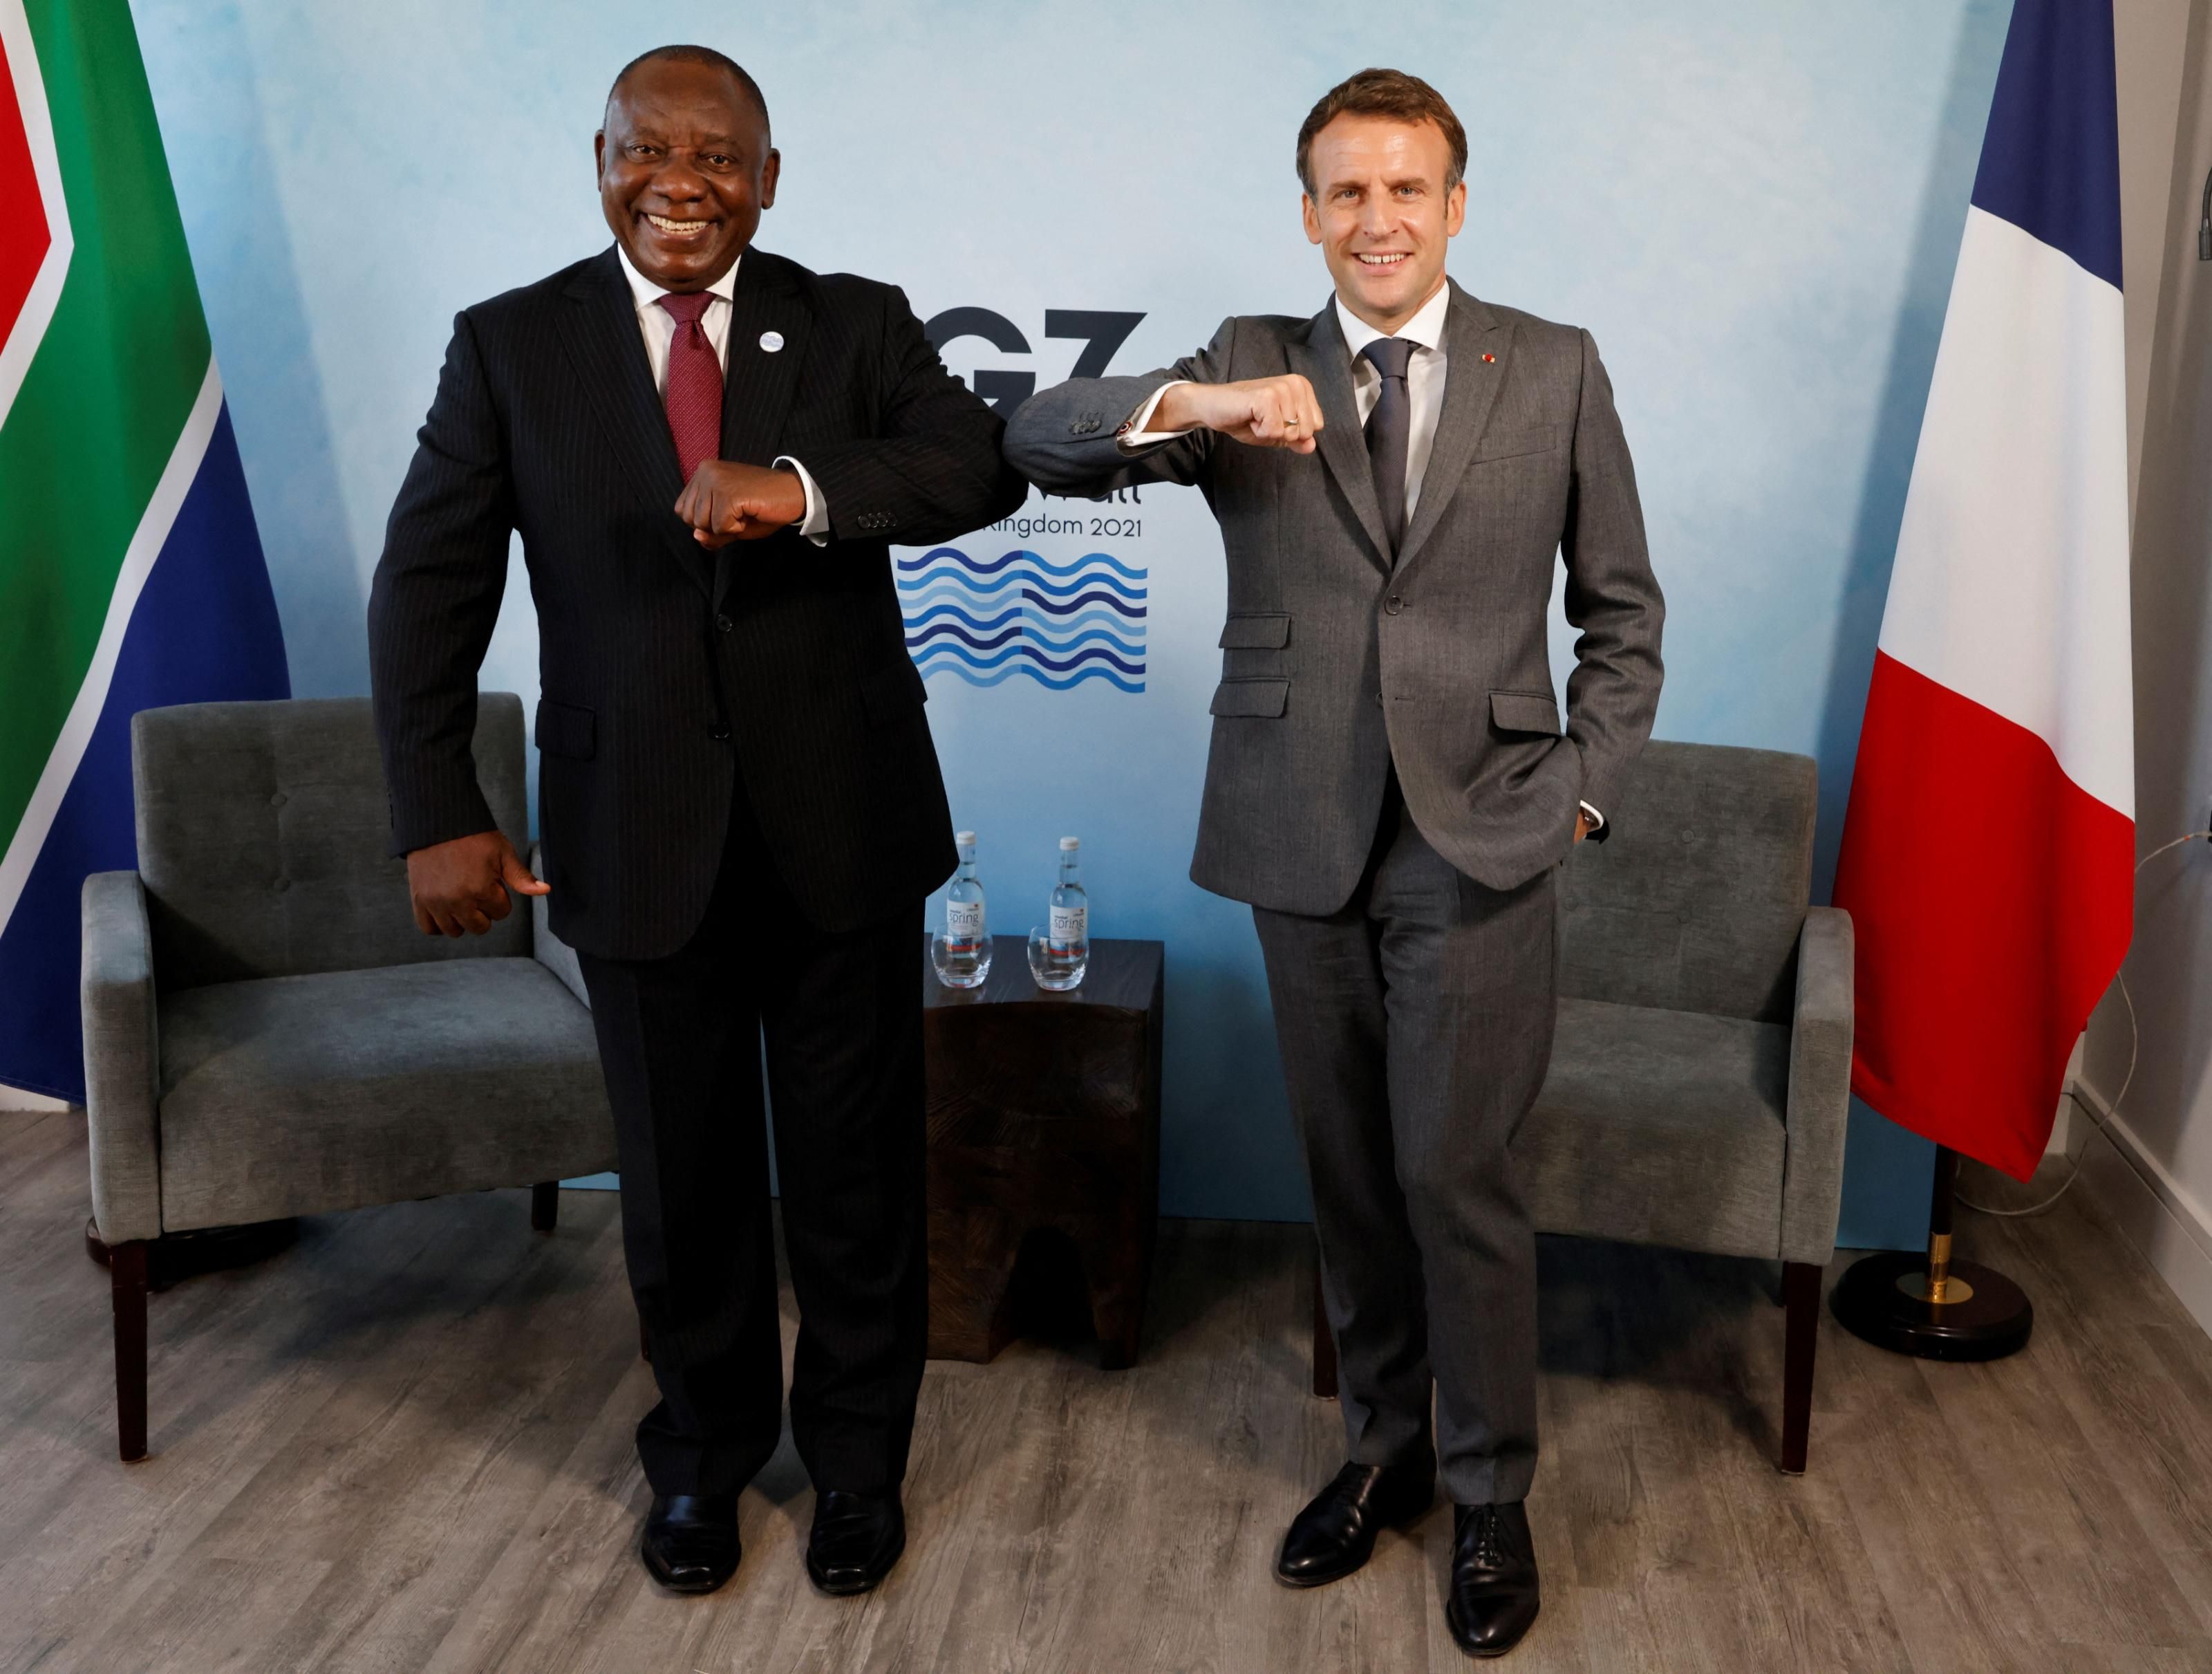 South Africa's President Cyril Ramaphosa (L) greets France's President Emmanuel Macron before a bilateral meeting during the G7 summit in Carbis Bay, Cornwall on June 12, 2021. (Phot: Ludovic Marin/AFP via Getty Images)